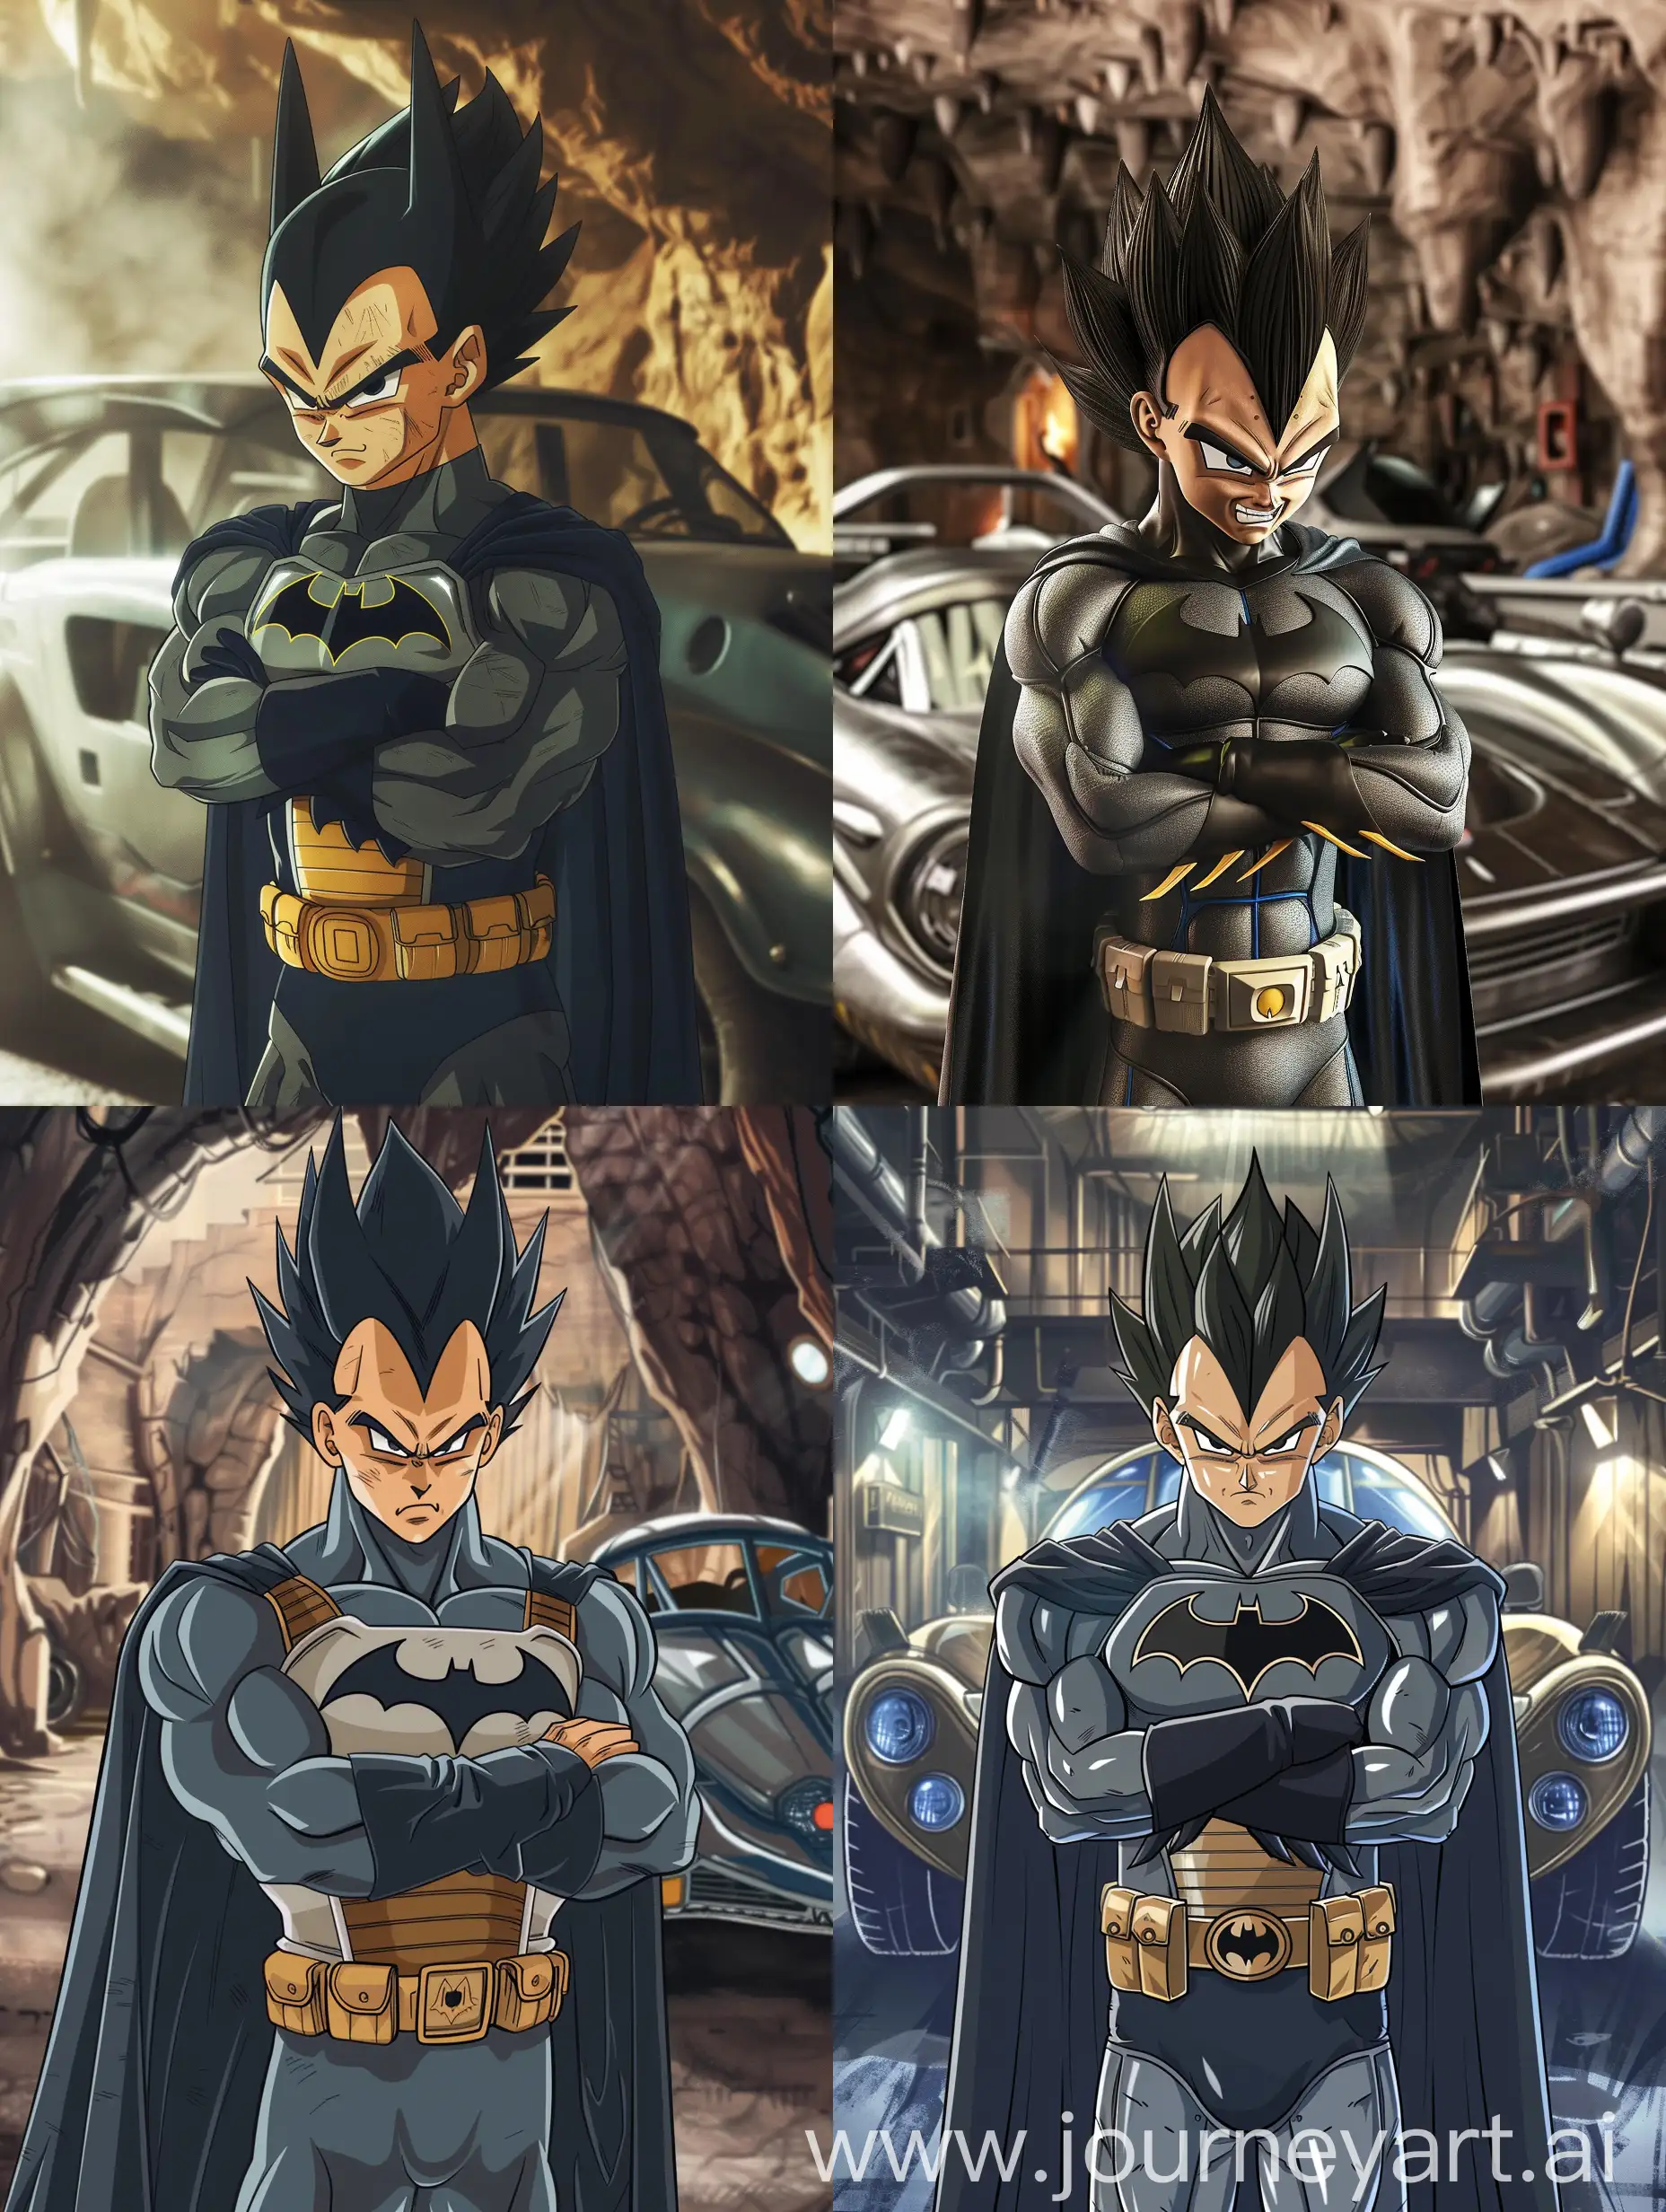 Vegeta from Dragonball wearing the Batman Suit, arms crossed, angry look in the style of the anime, standing in front of the batmobile in the batcave